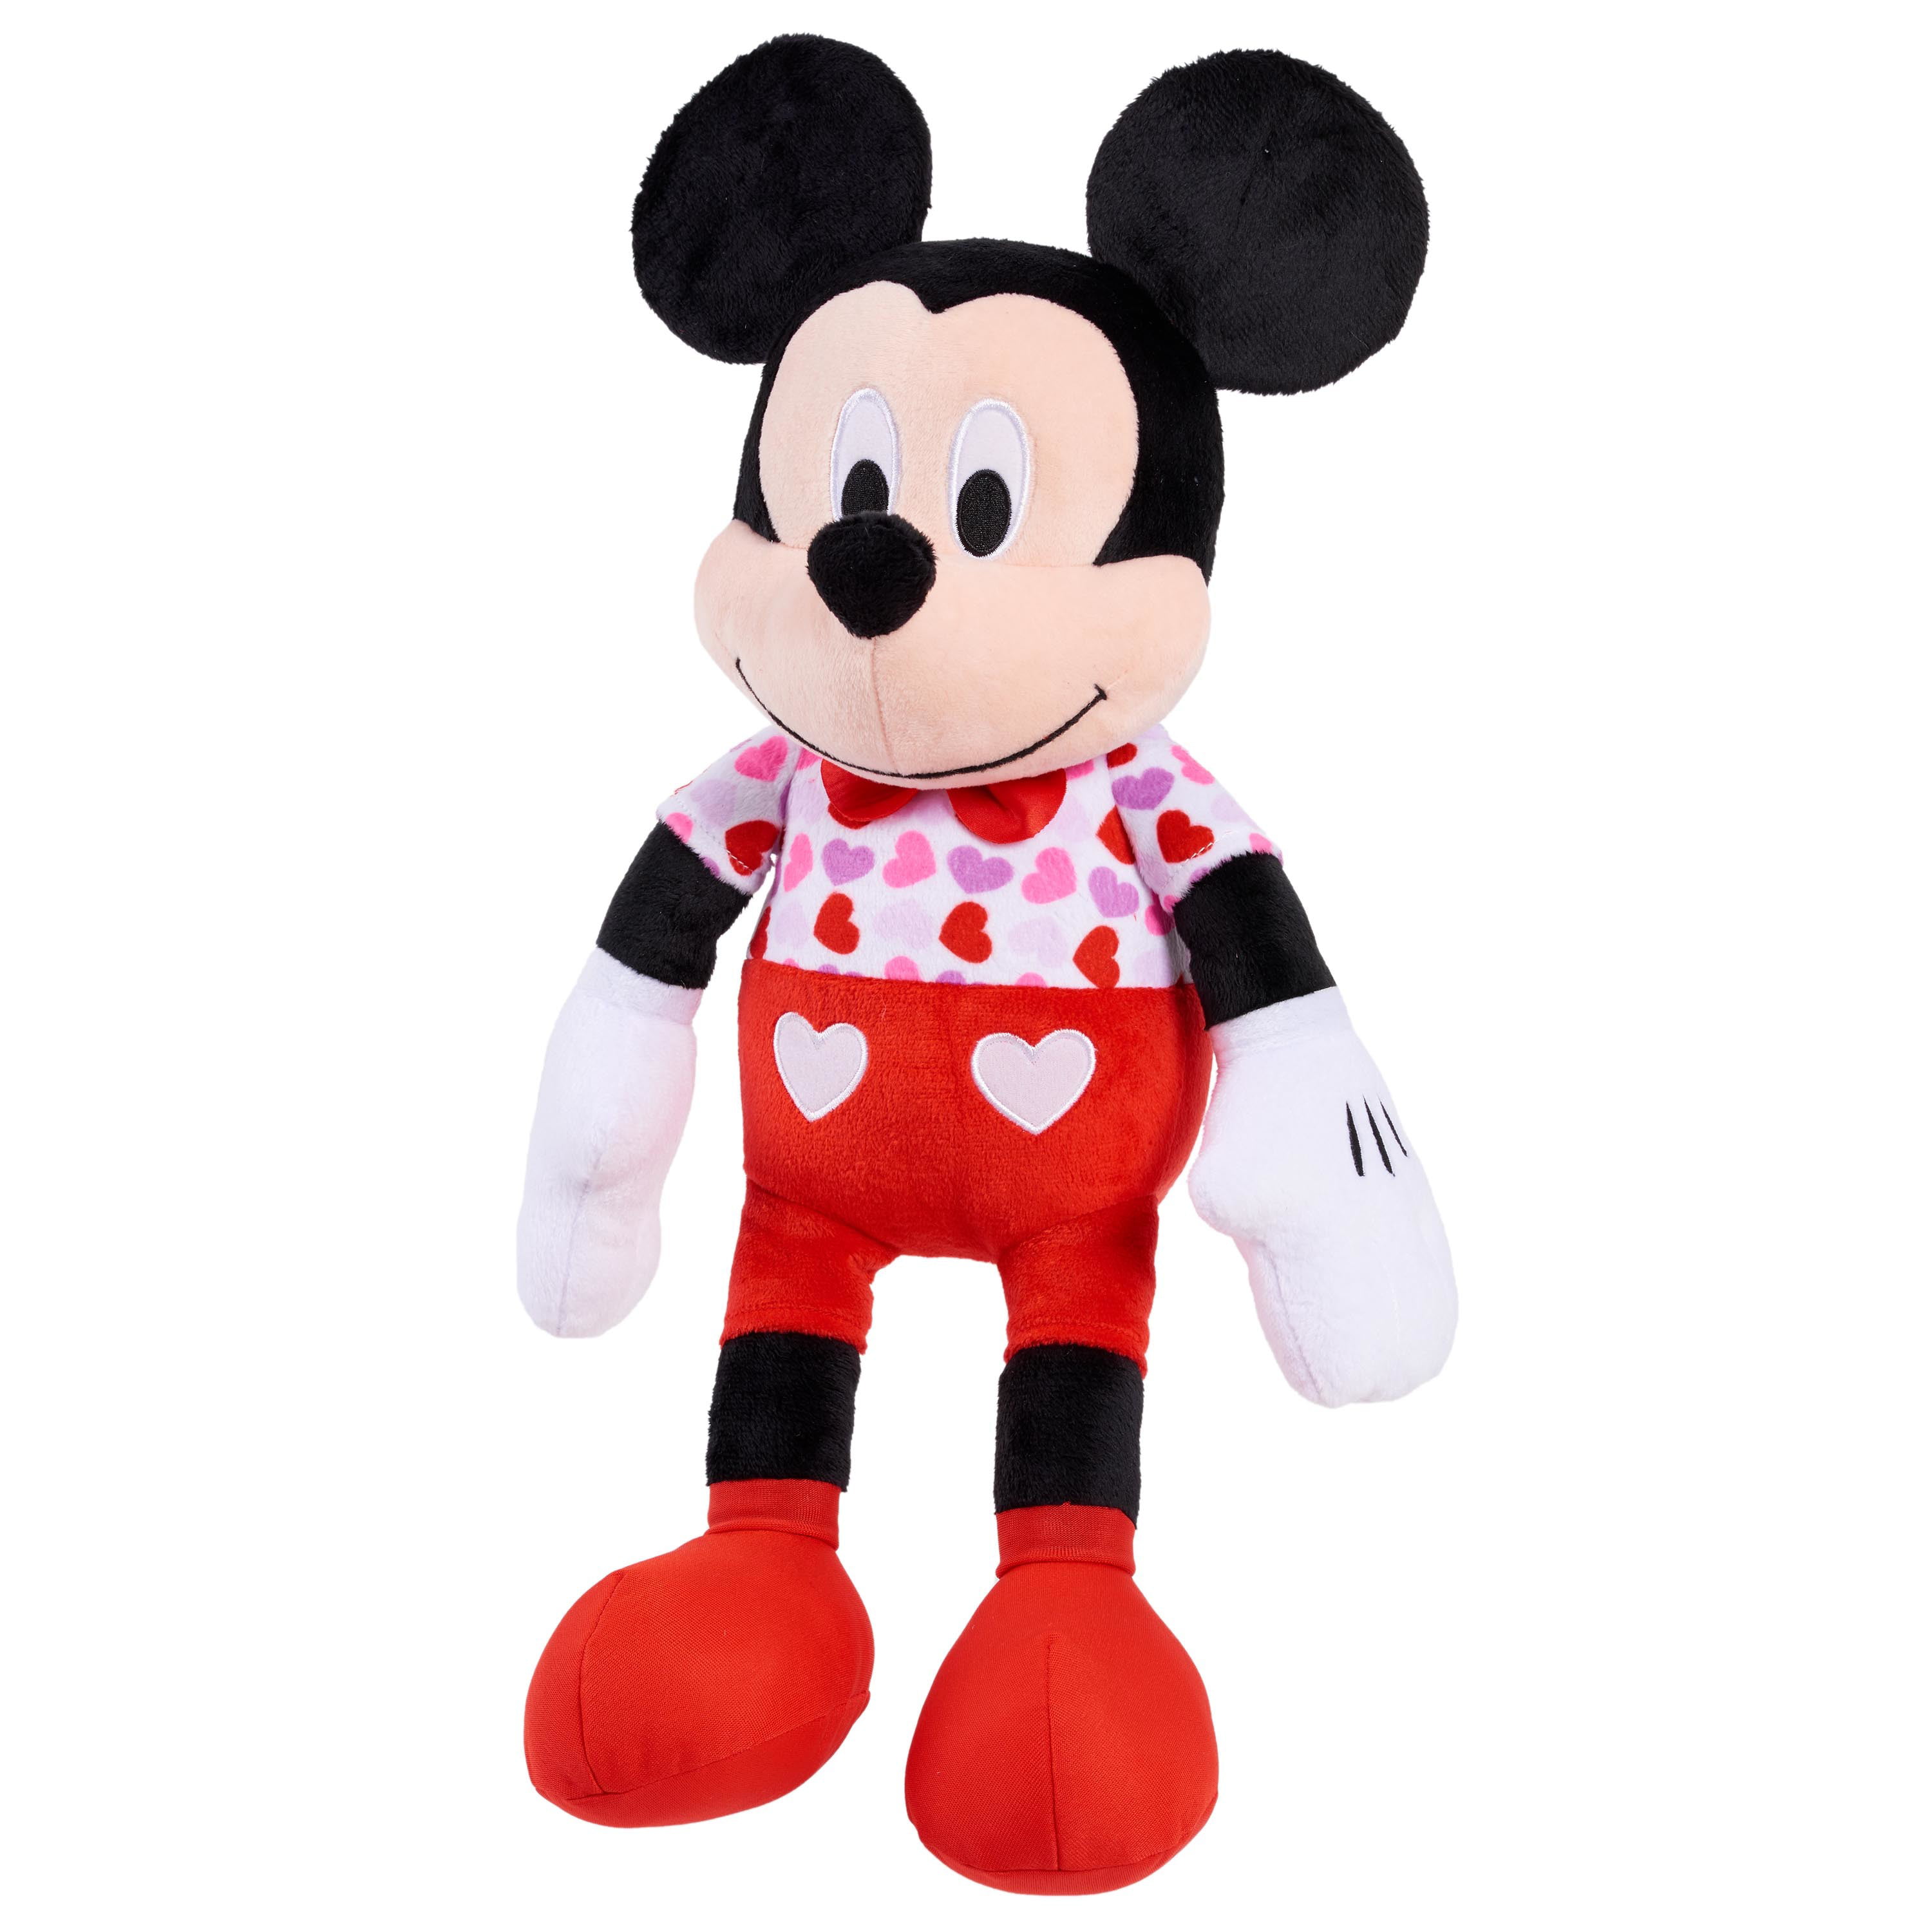 Giant Size Disney Mickey Mouse Plush Doll Backpack Costume Bag Cushion Pillow